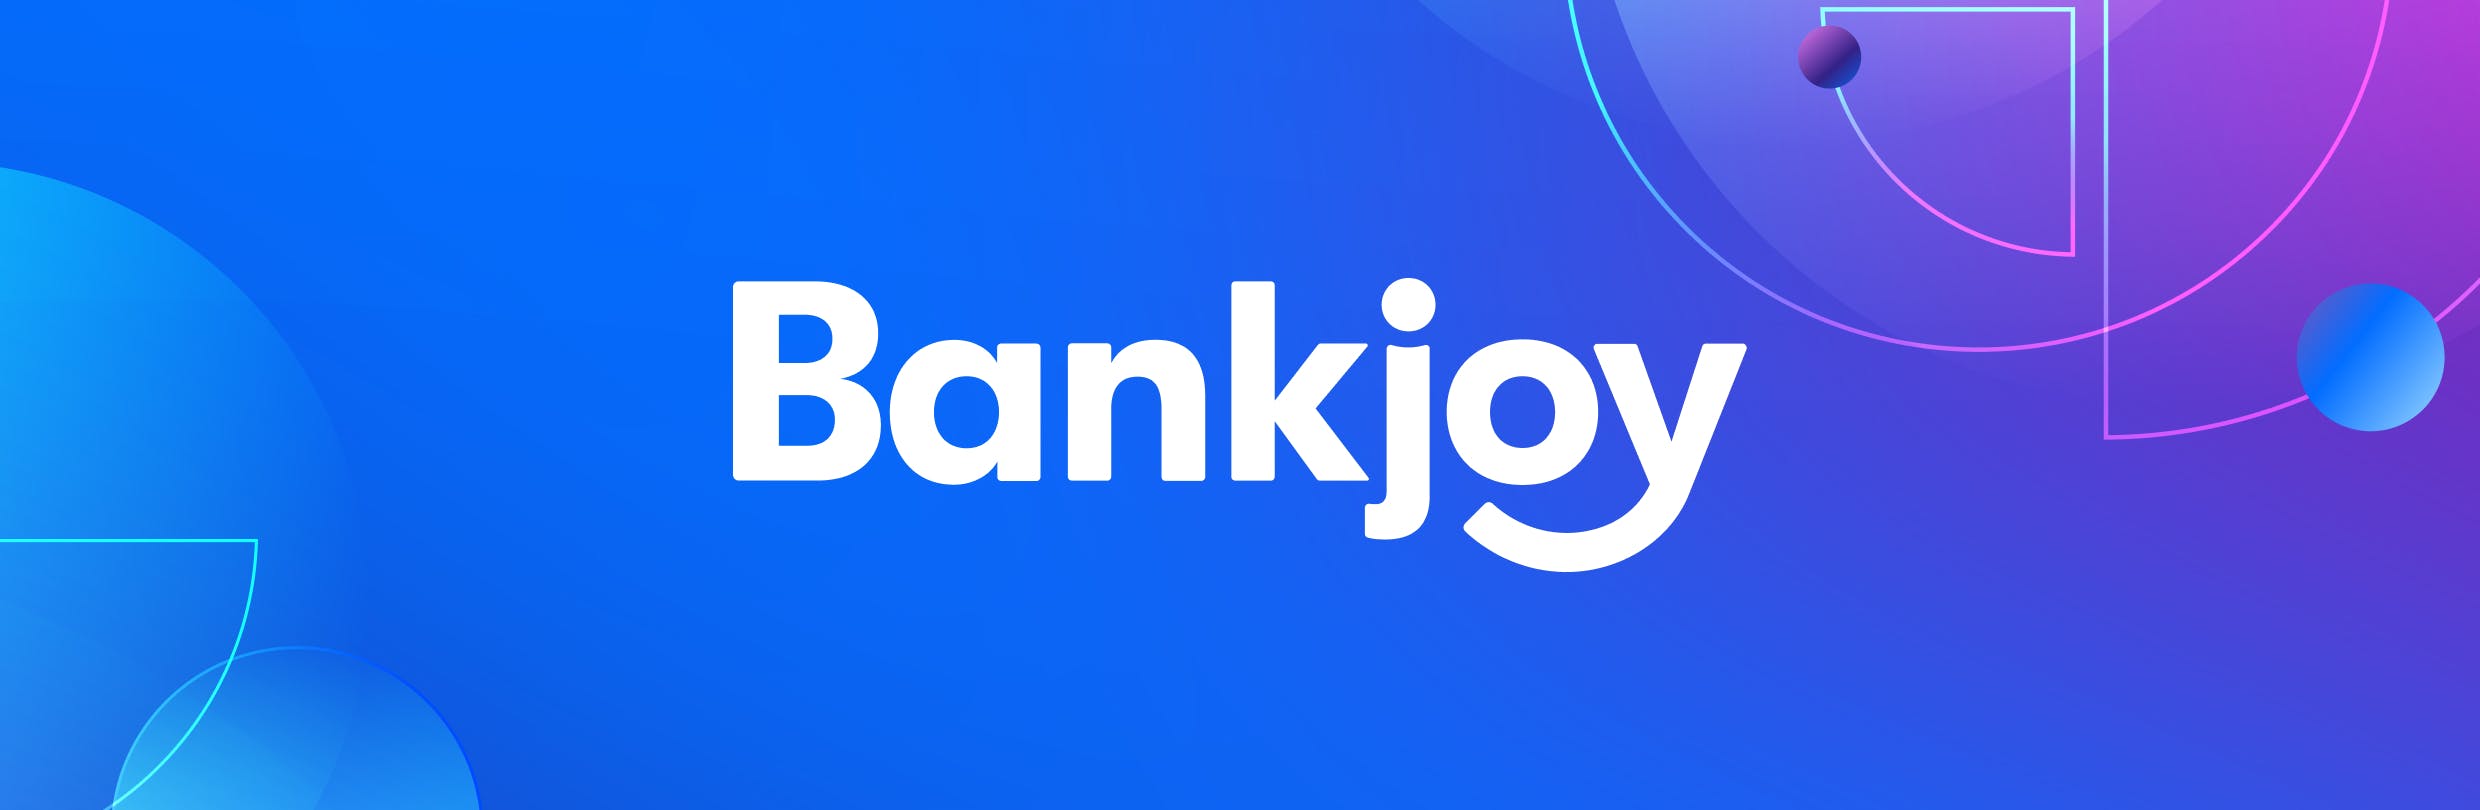 Bankjoy — Digital Banking for Banks and Credit Unions